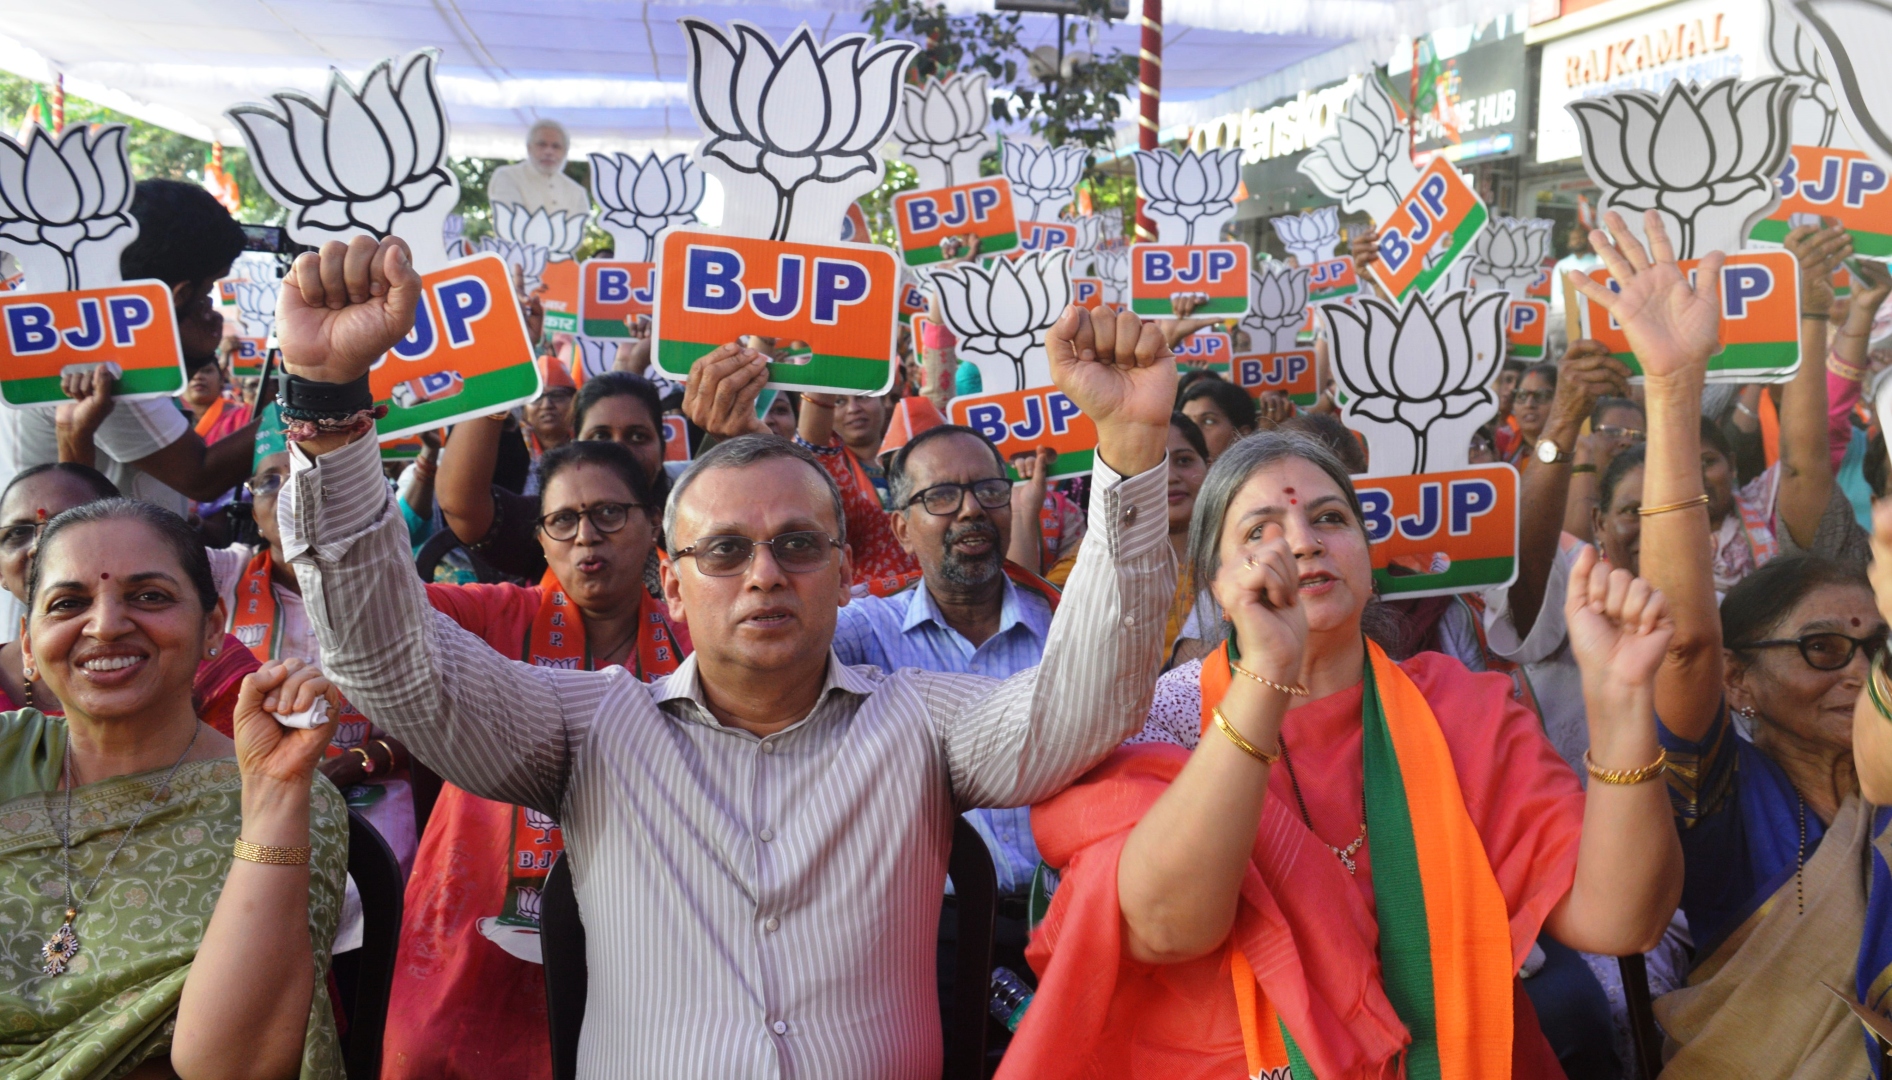 BJP pins hopes on ‘Operation Lotus’ in Salcete